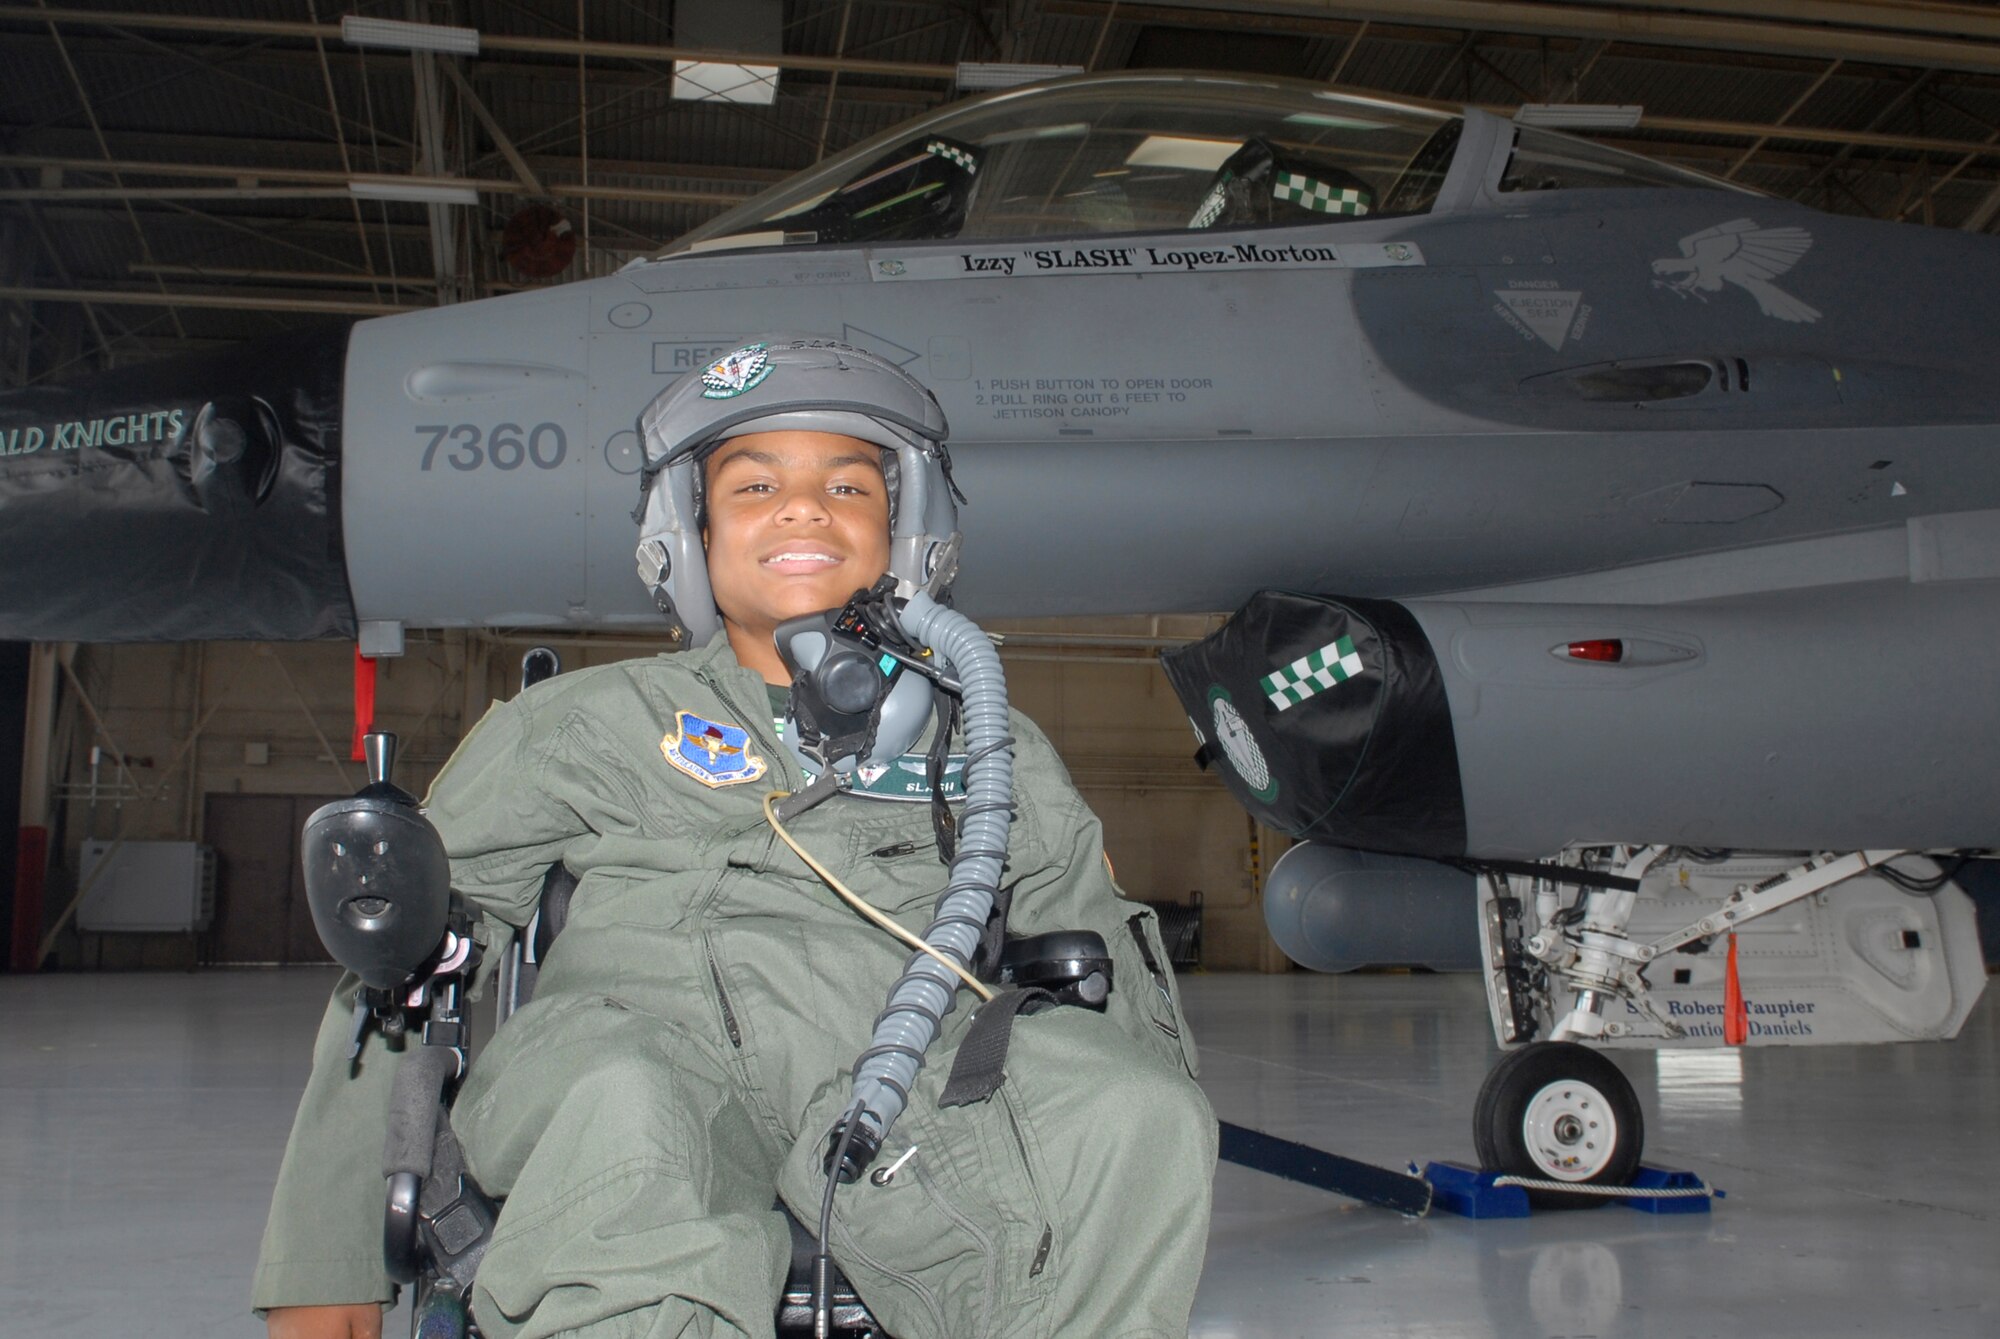 Izzy "Slash" Lopez-Morton, pilot-for-a-day, poses in front of his jet Aug. 26 after visiting Luke to learn what it's like to be an F-16 fighter pilot.